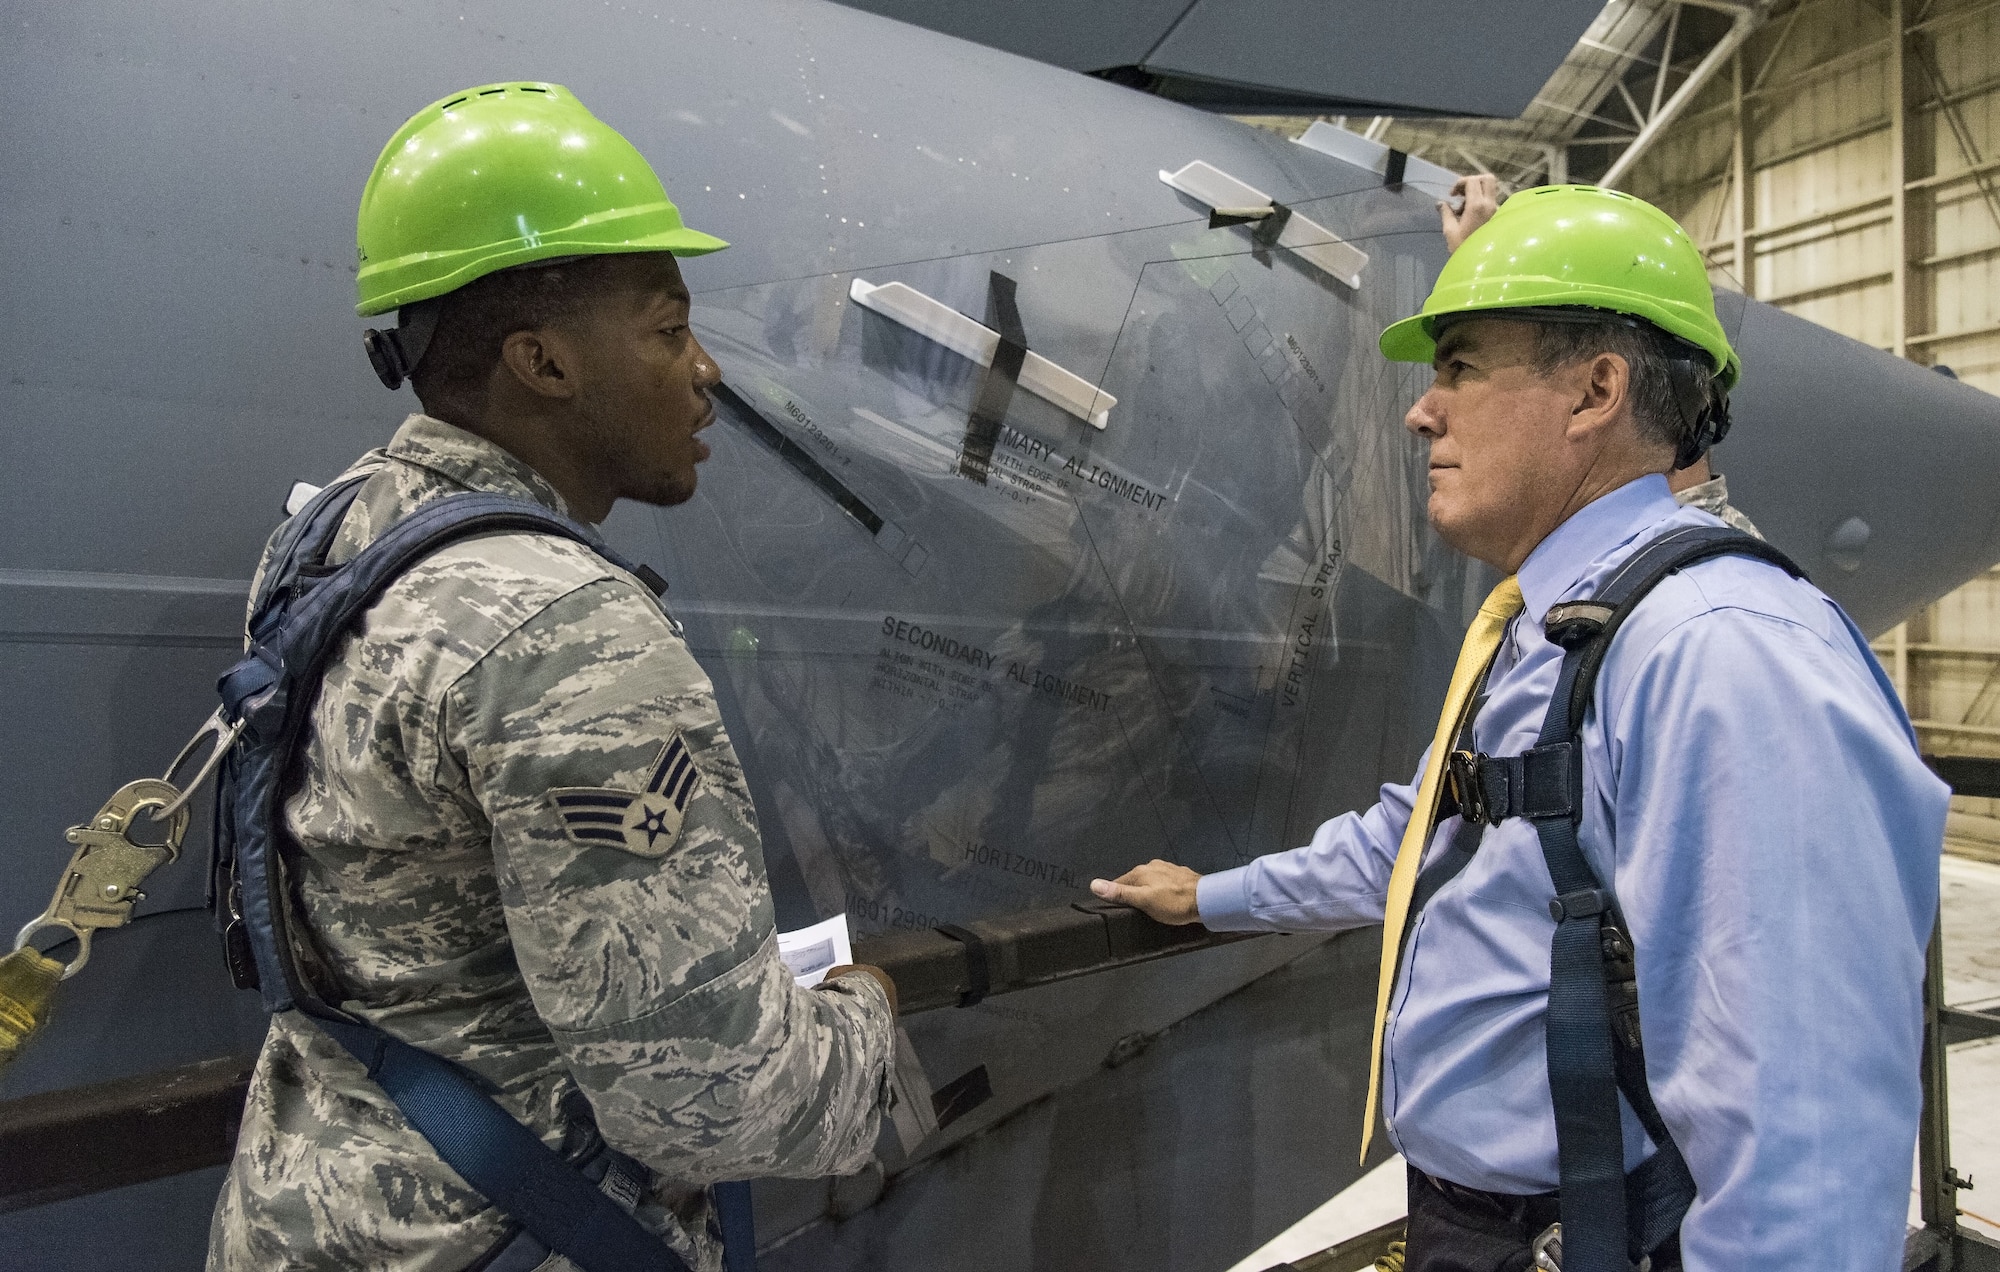 Senior Airman Terrence Williamson, 736th Aircraft Maintenance Squadron aerospace maintenance journeyman, explains to Roberto Guerrero, Deputy Assistant Secretary of the Air Force for Operational Energy, Headquarters U.S. Air Force, Washington, D.C., how Microvanes positioned on each side at the rear of a C-17 Globemaster III fuselage using a Mylar template, Sept. 6, 2017, at Dover Air Force Base, Del. Microvanes essentially clean up the airflow in the region of the cargo door by re-energizing the air with small vortices that delay separation, smooth the flow, and reduce drag. “The programs APTO is working on are great examples of how we can increase our combat capability through the smart use of operational energy,” said Guerrero. (U.S. Air Force photo by Roland Balik)